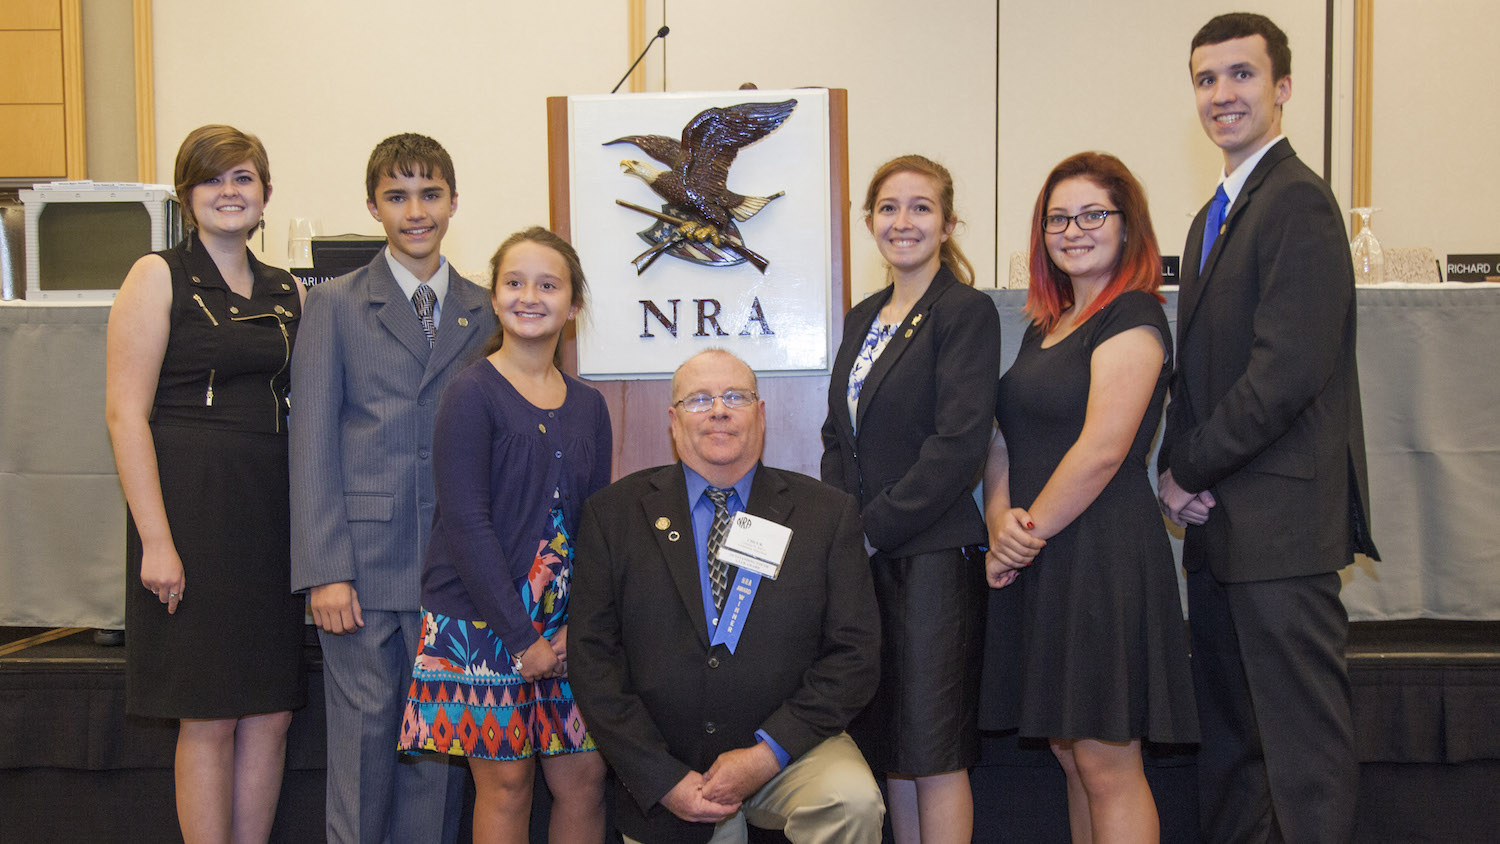 NRA bestows National Awards to outstanding individuals, groups at Board Meetings